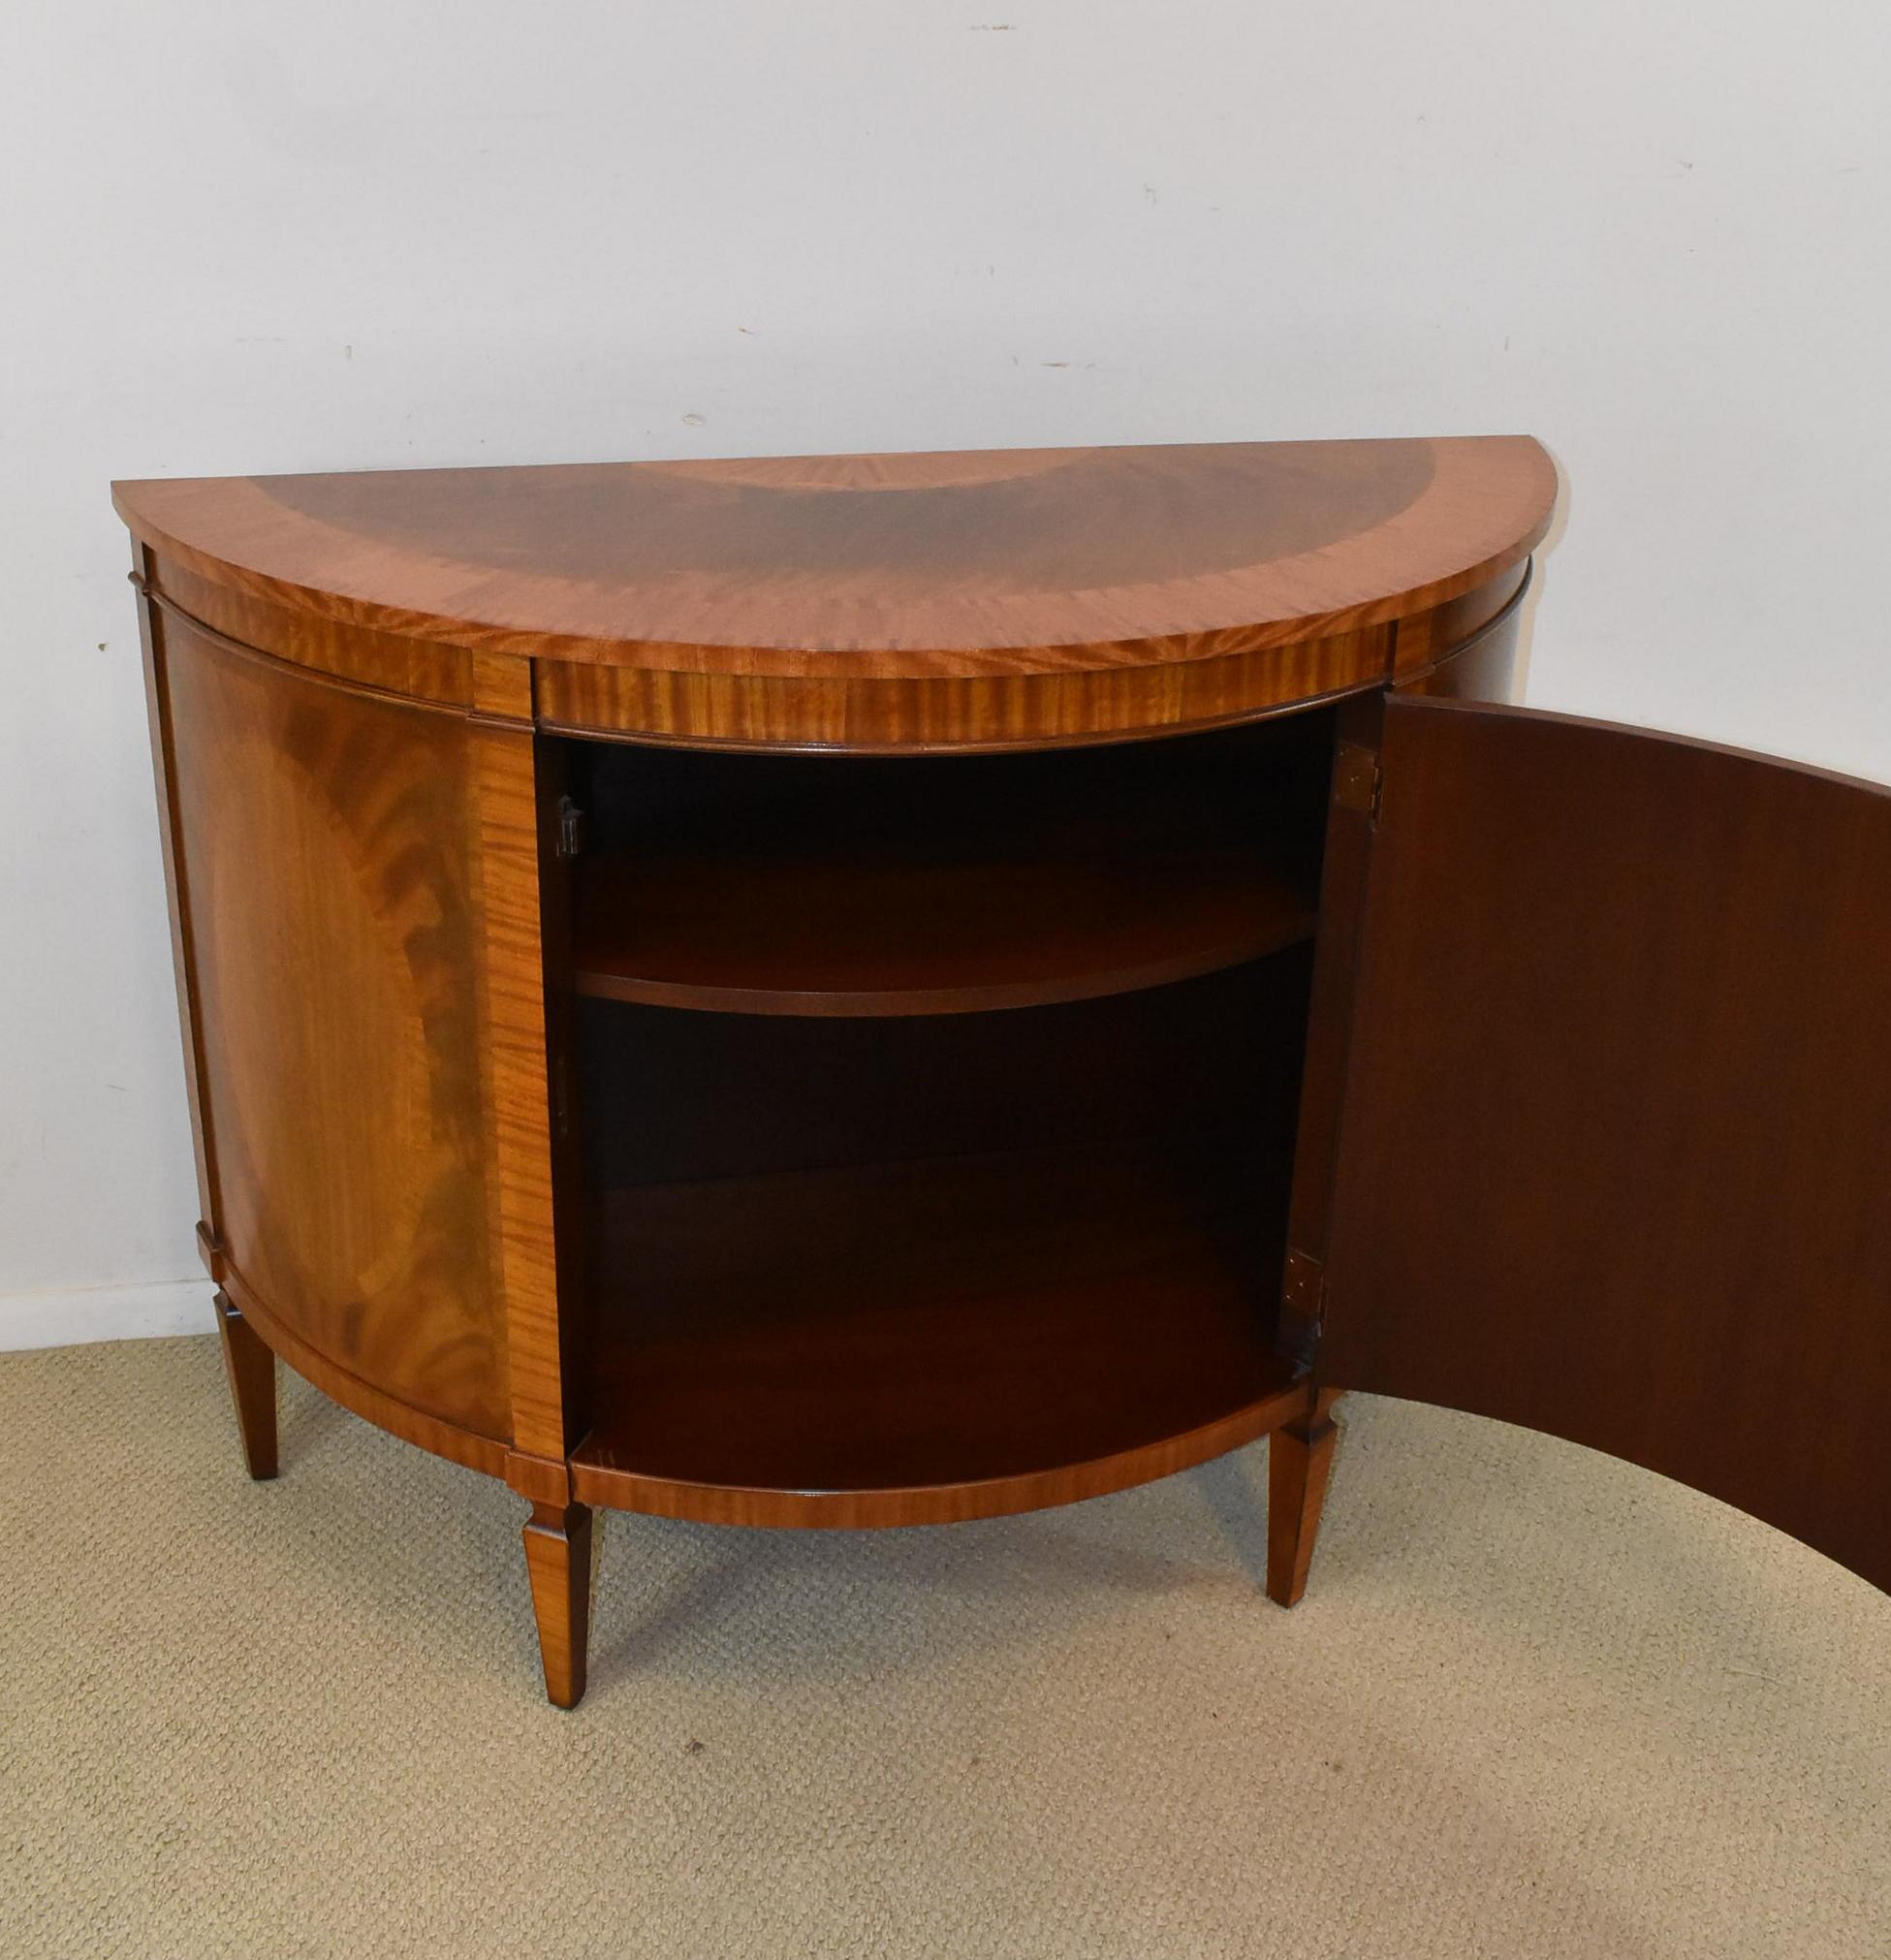 20th Century Flamed Mahogany Demilune by Baker Furniture, Historic Charleston Collection